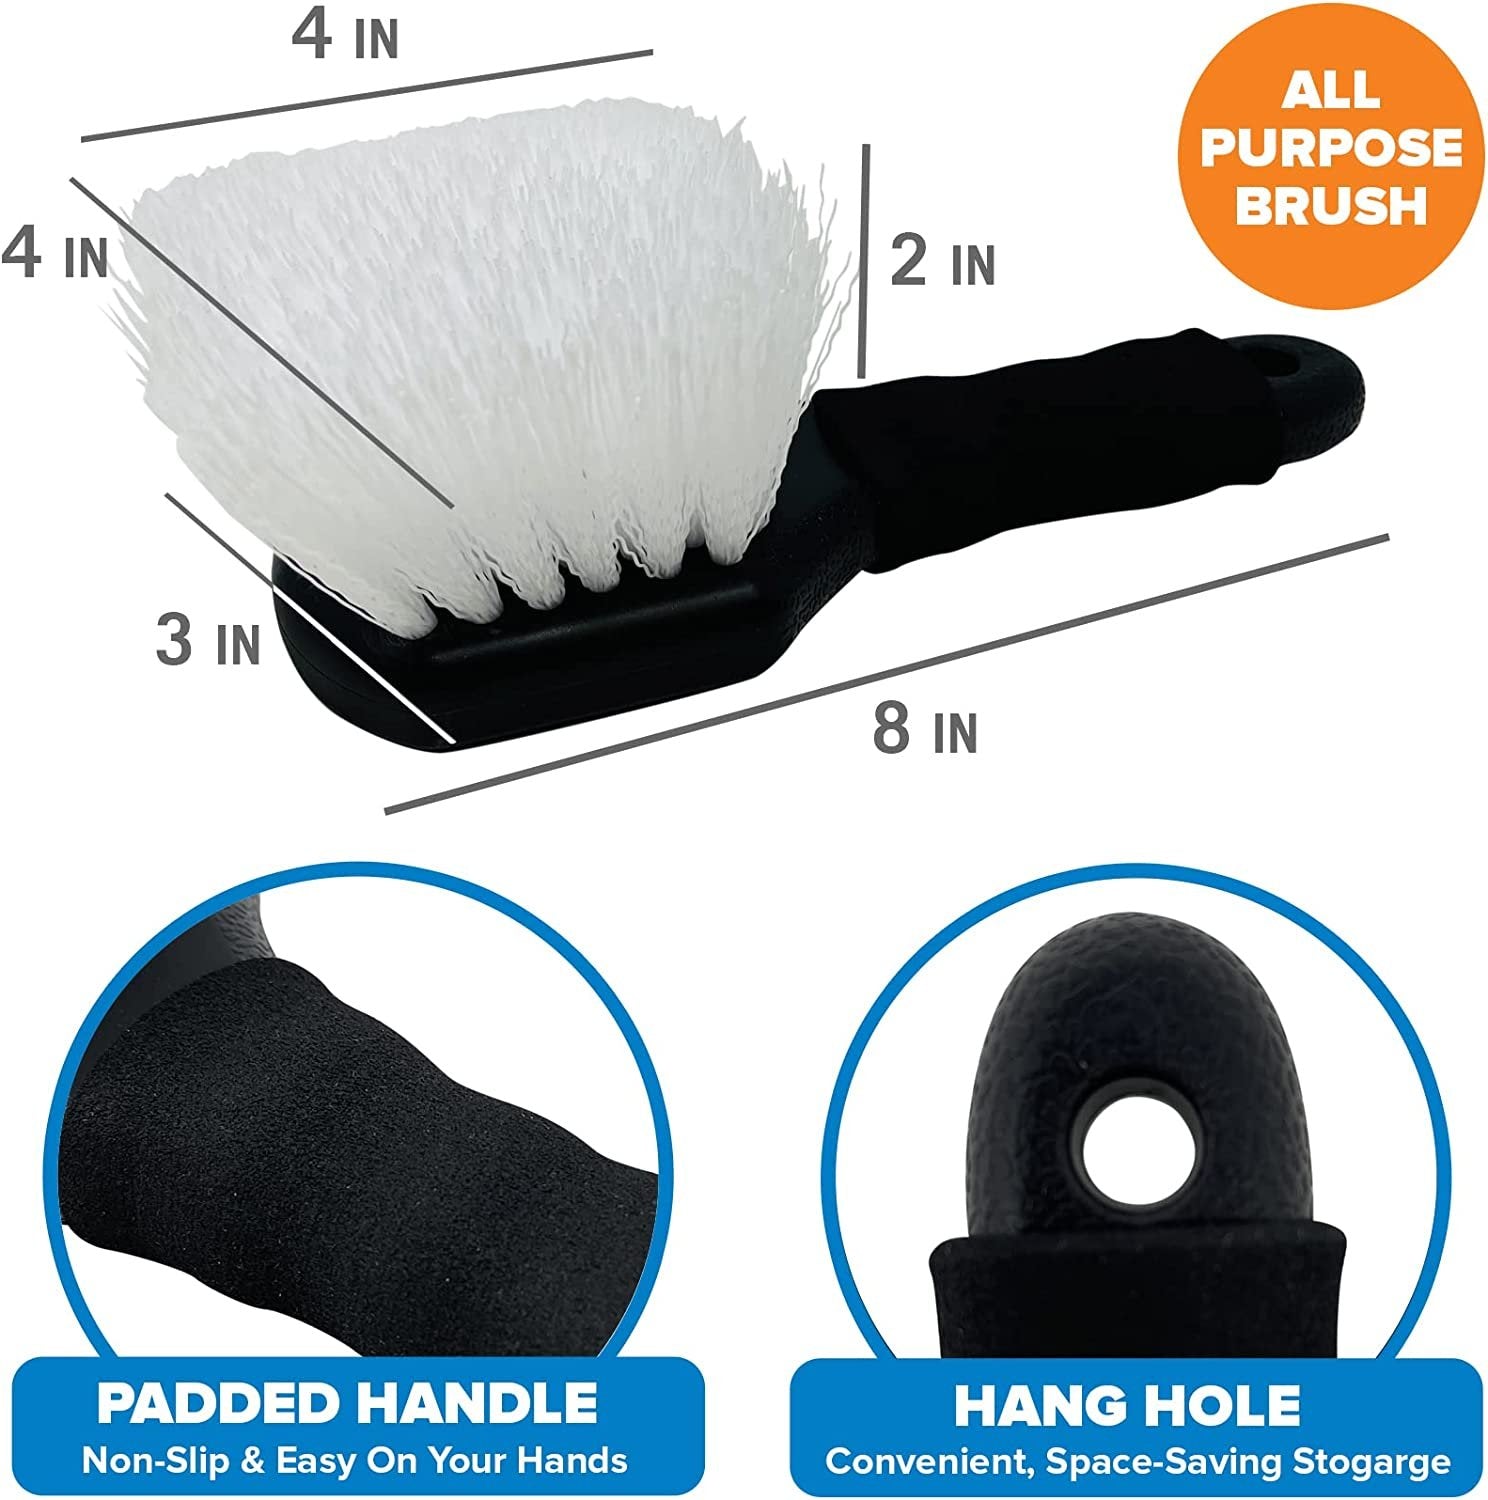 Stiff Hand Scrub Brushes for Cleaning Heavy Duty Utility Outdoor Scrub Brush with Handle All Purpose Boat & Car Small Cleaning Brush & Bathroom Bathtub Shower Tub Wheel & Tire Scrubber -Short Handled